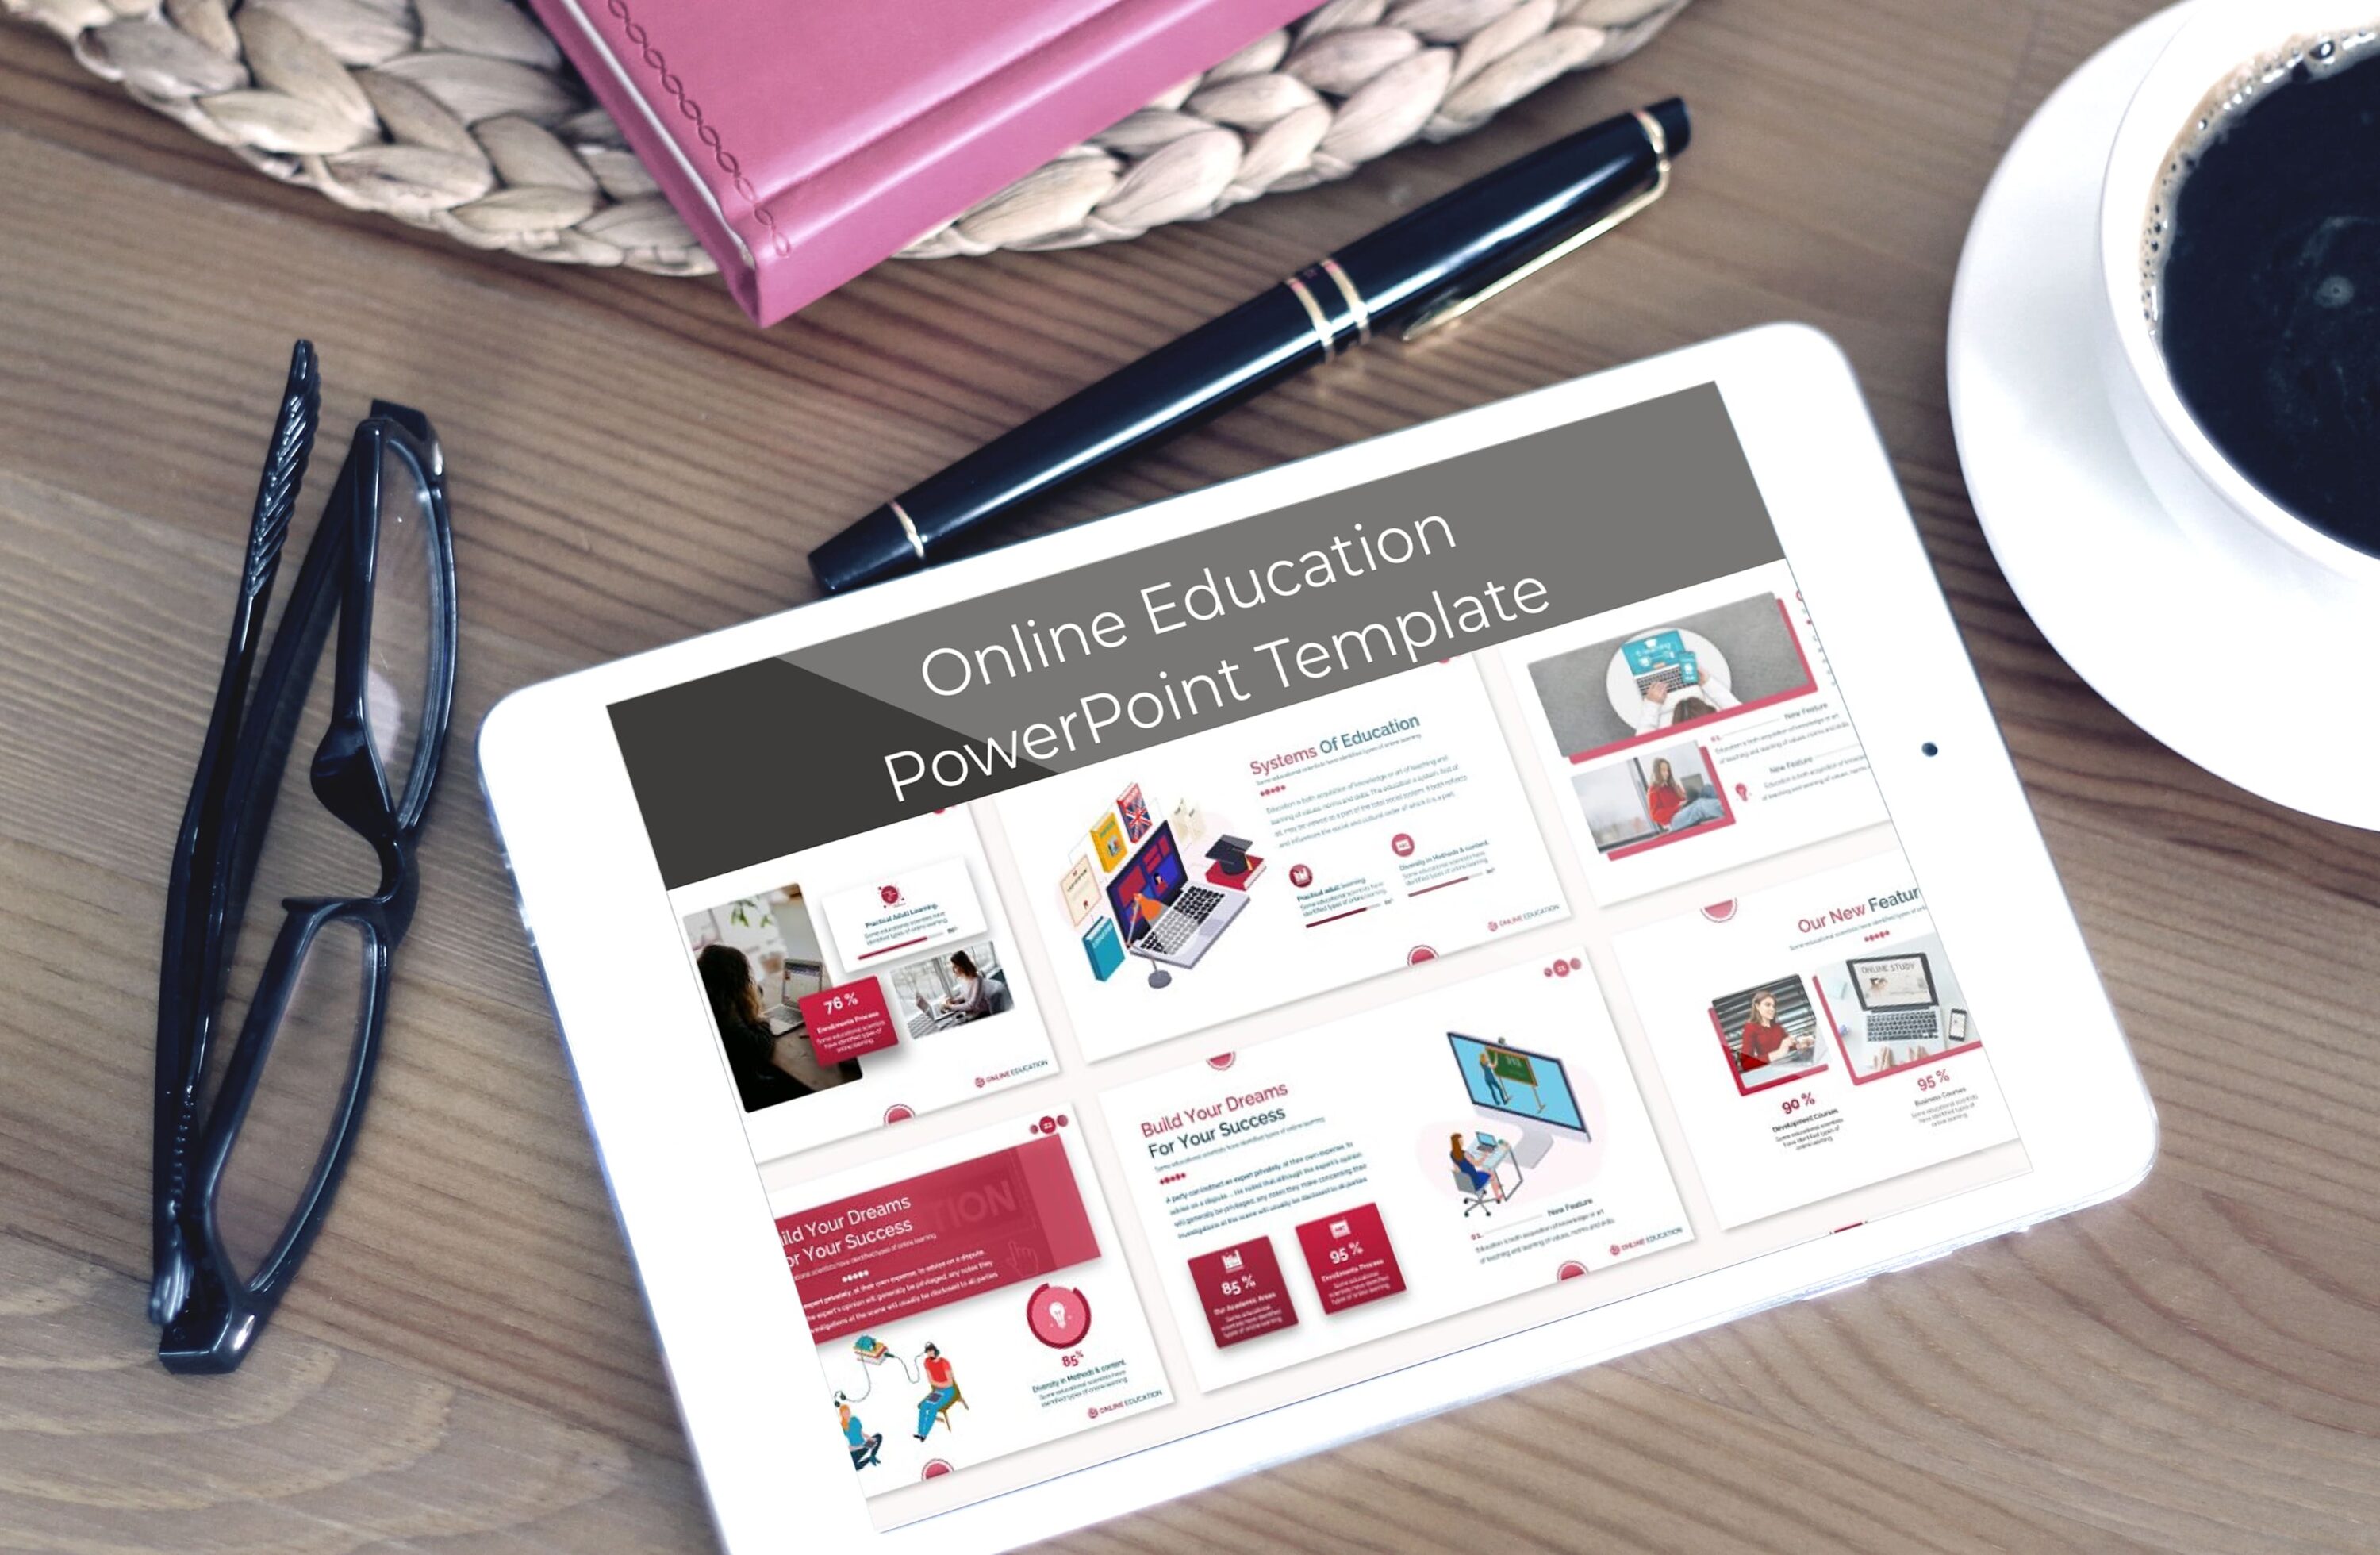 Online Education PowerPoint Template - tablet.